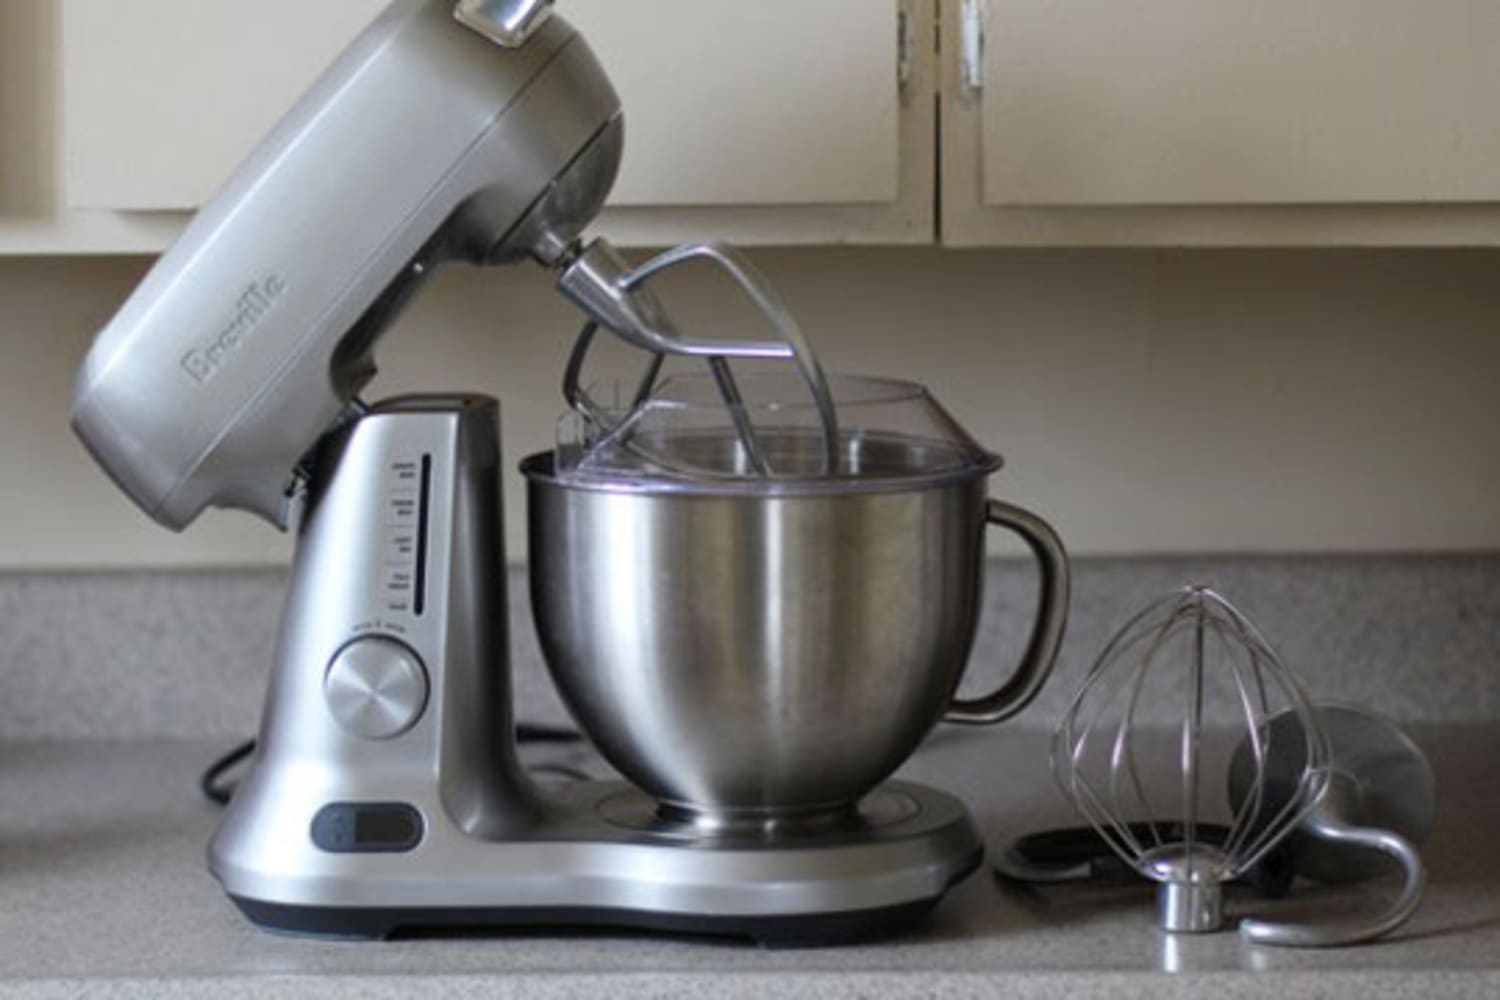 Product Review: 5-Quart Stand Mixer | The Kitchn